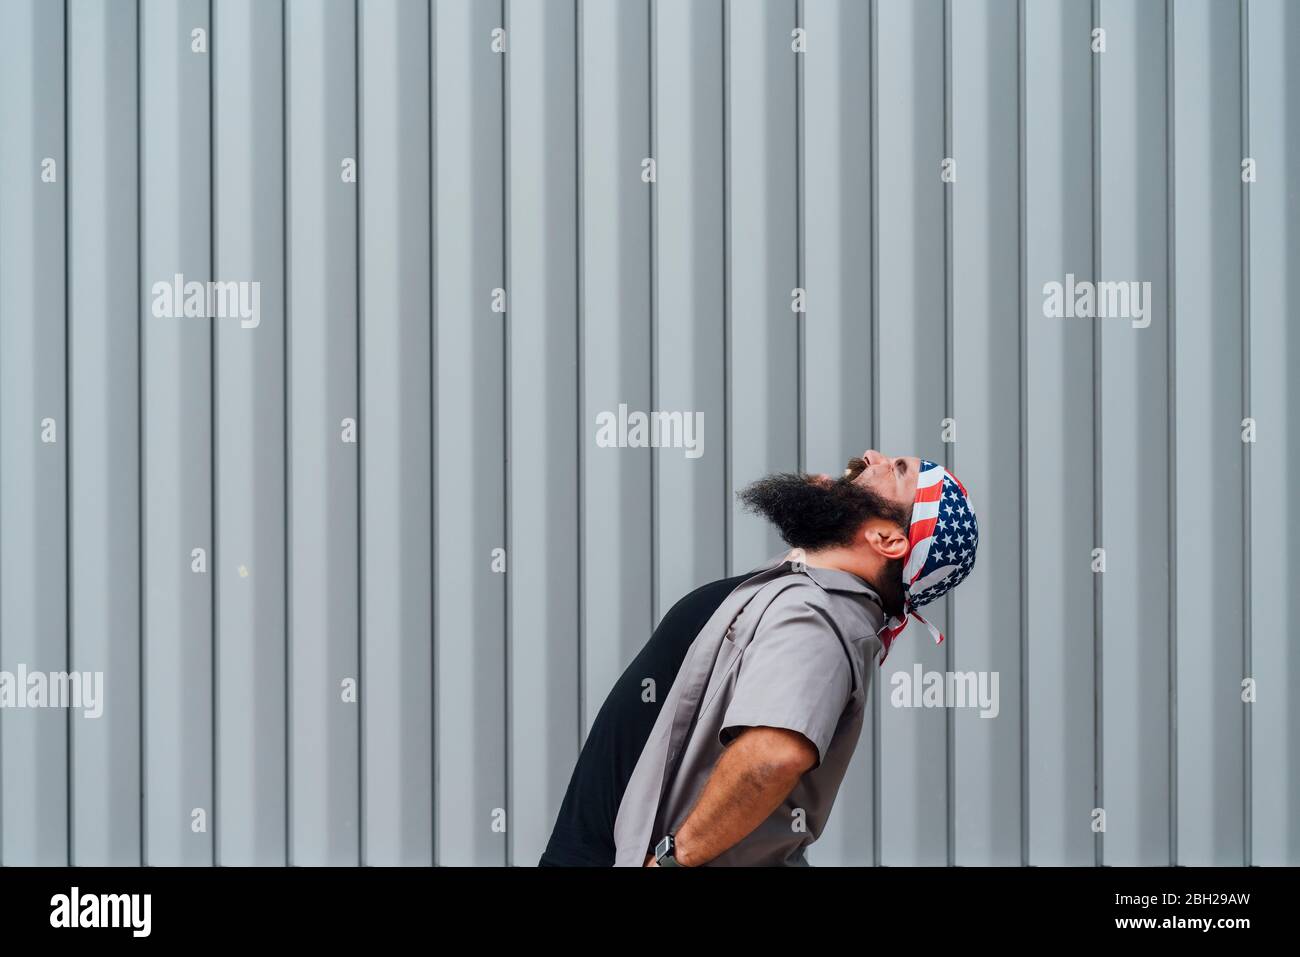 Yelling man wearing Star and Stripes headgear Stock Photo